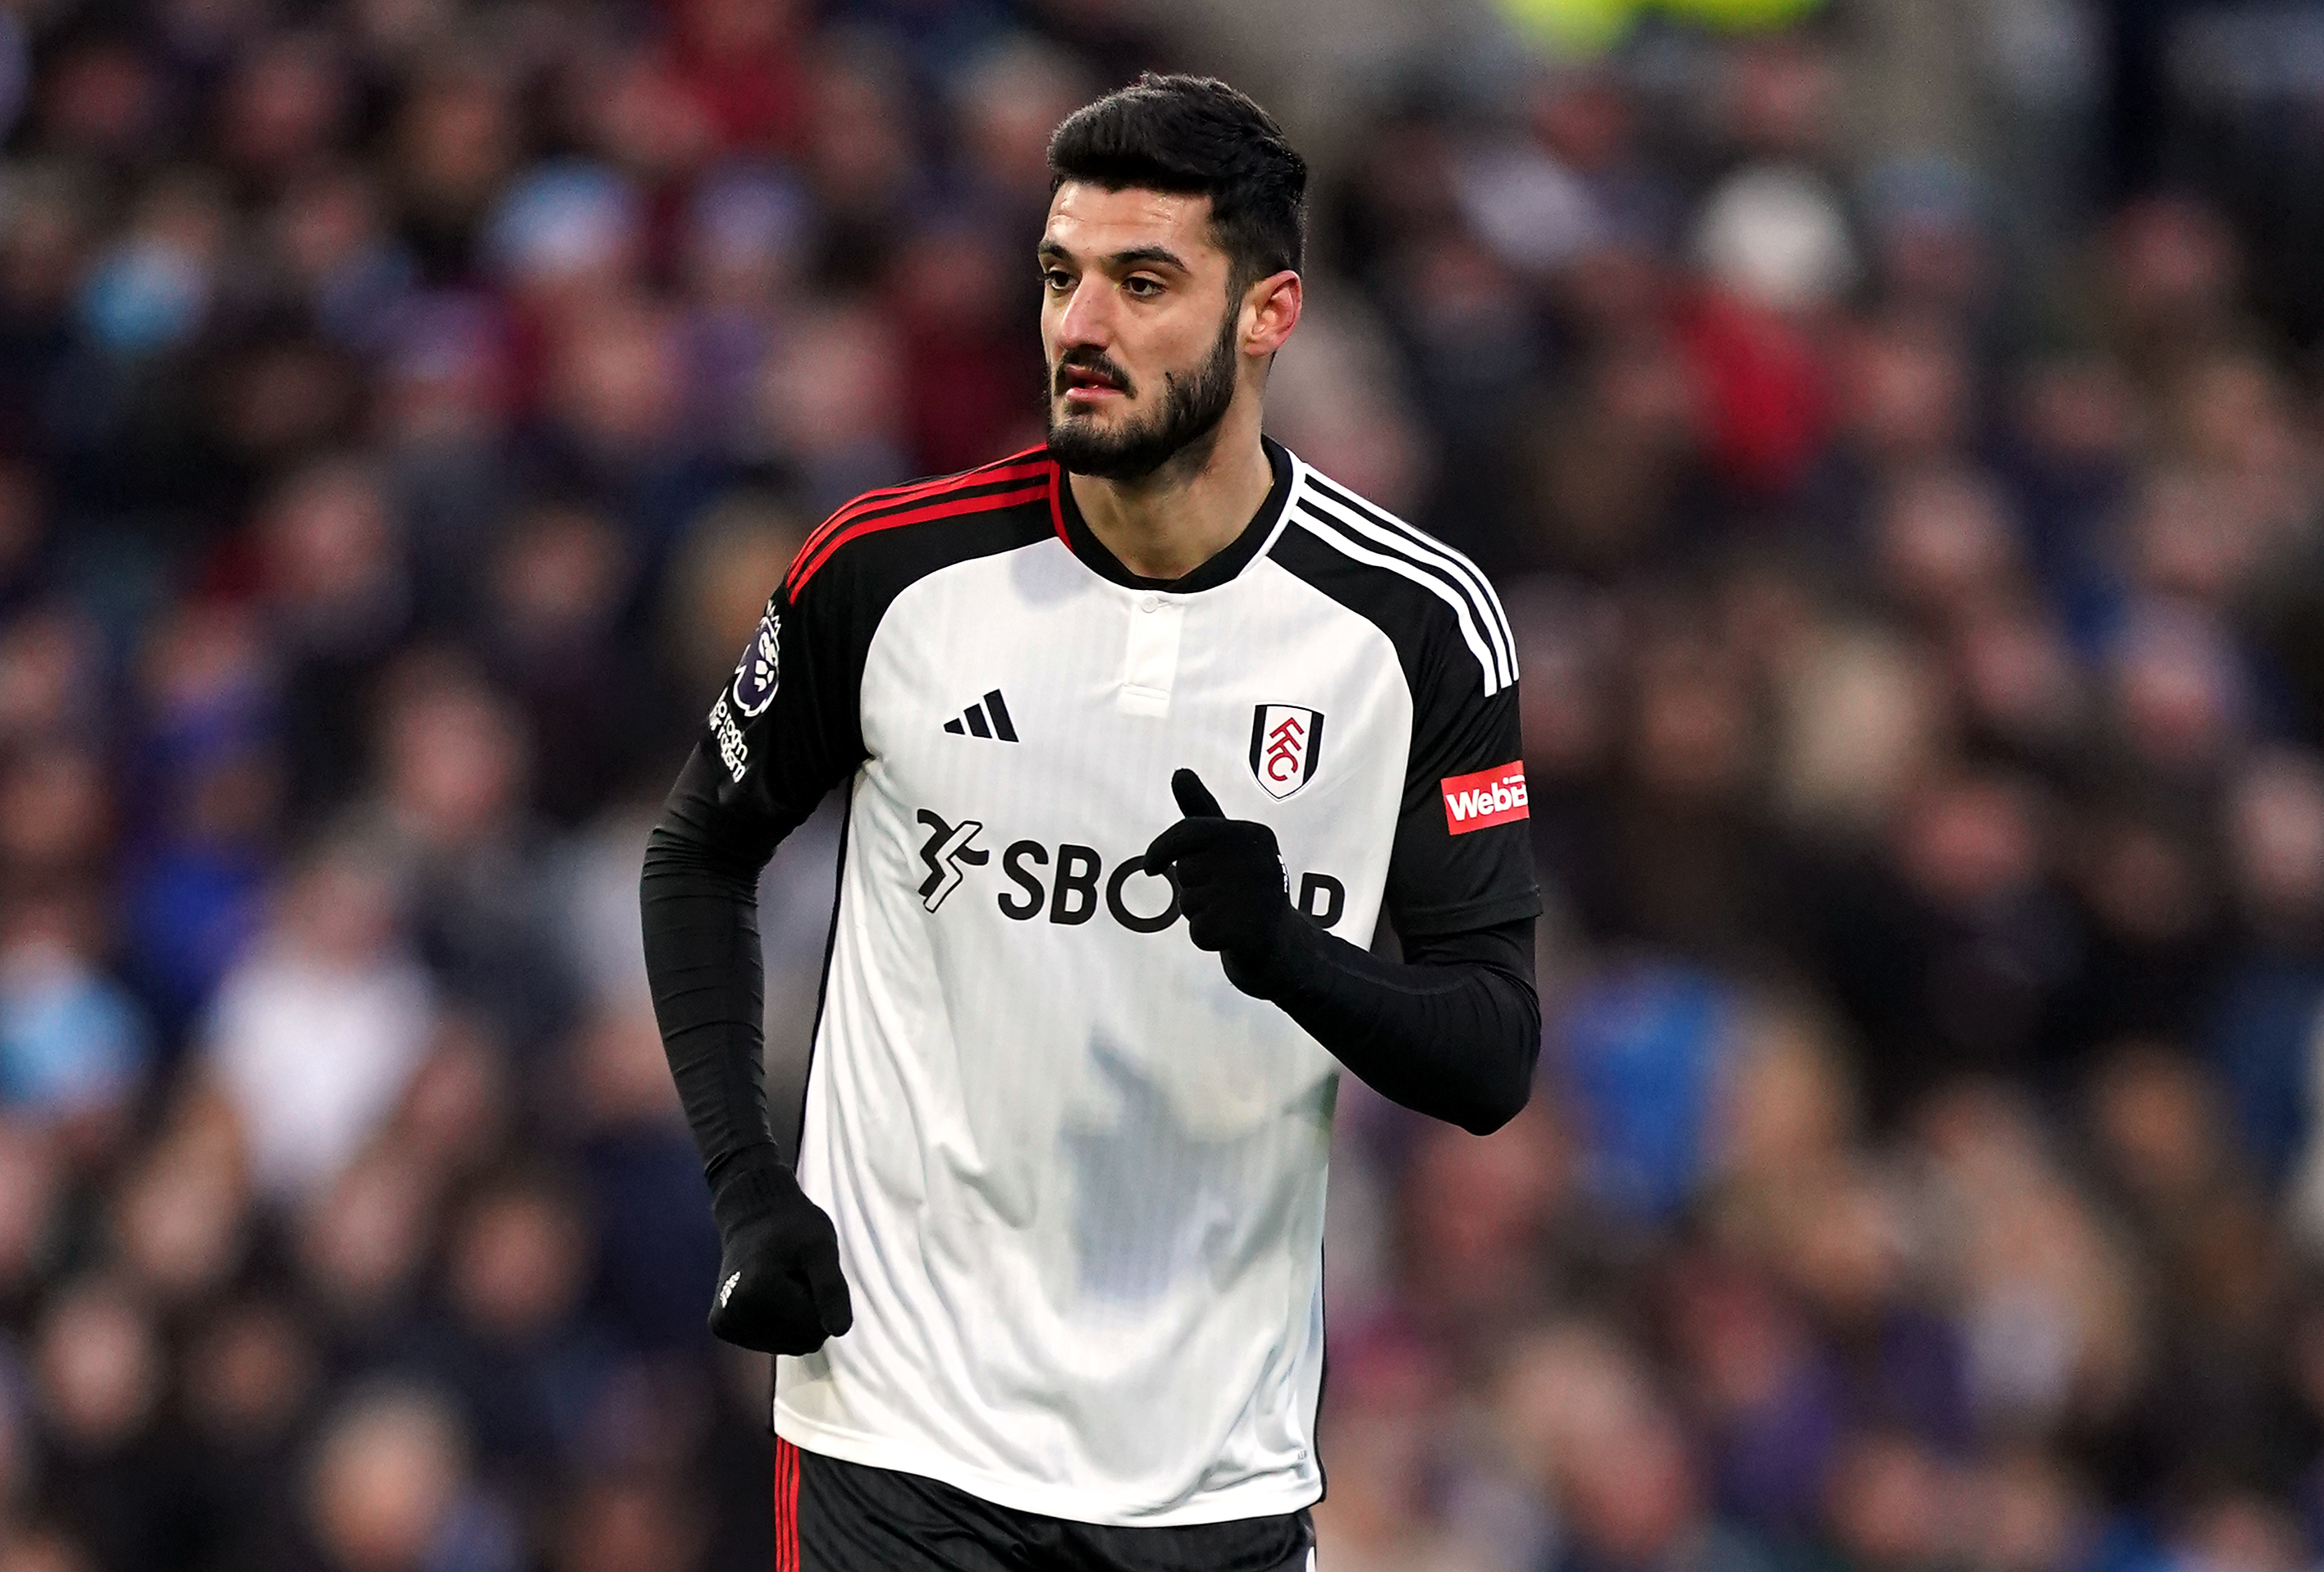 The striker has barely featured for Fulham since joining on loan